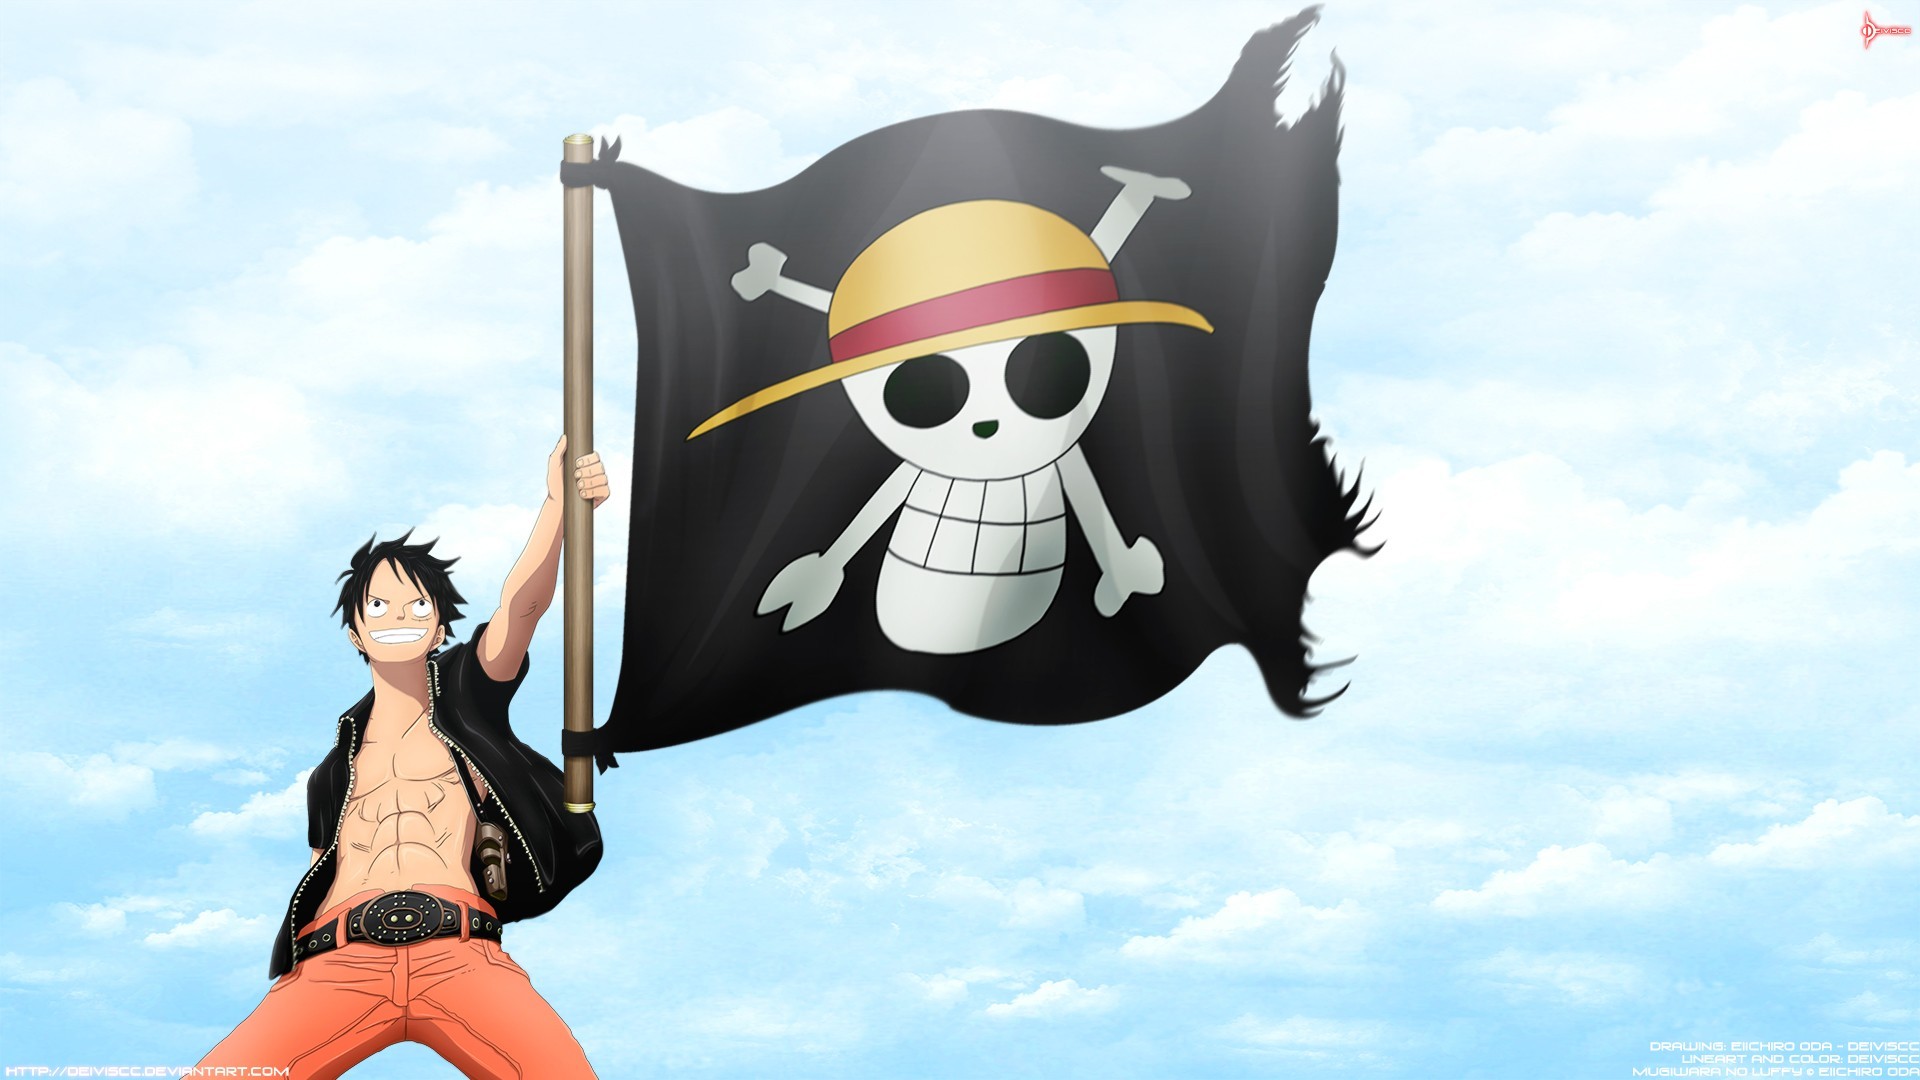 Anime 1920x1080 One Piece Monkey D. Luffy Straw Hat Pirates Jolly Roger Pirate Flag